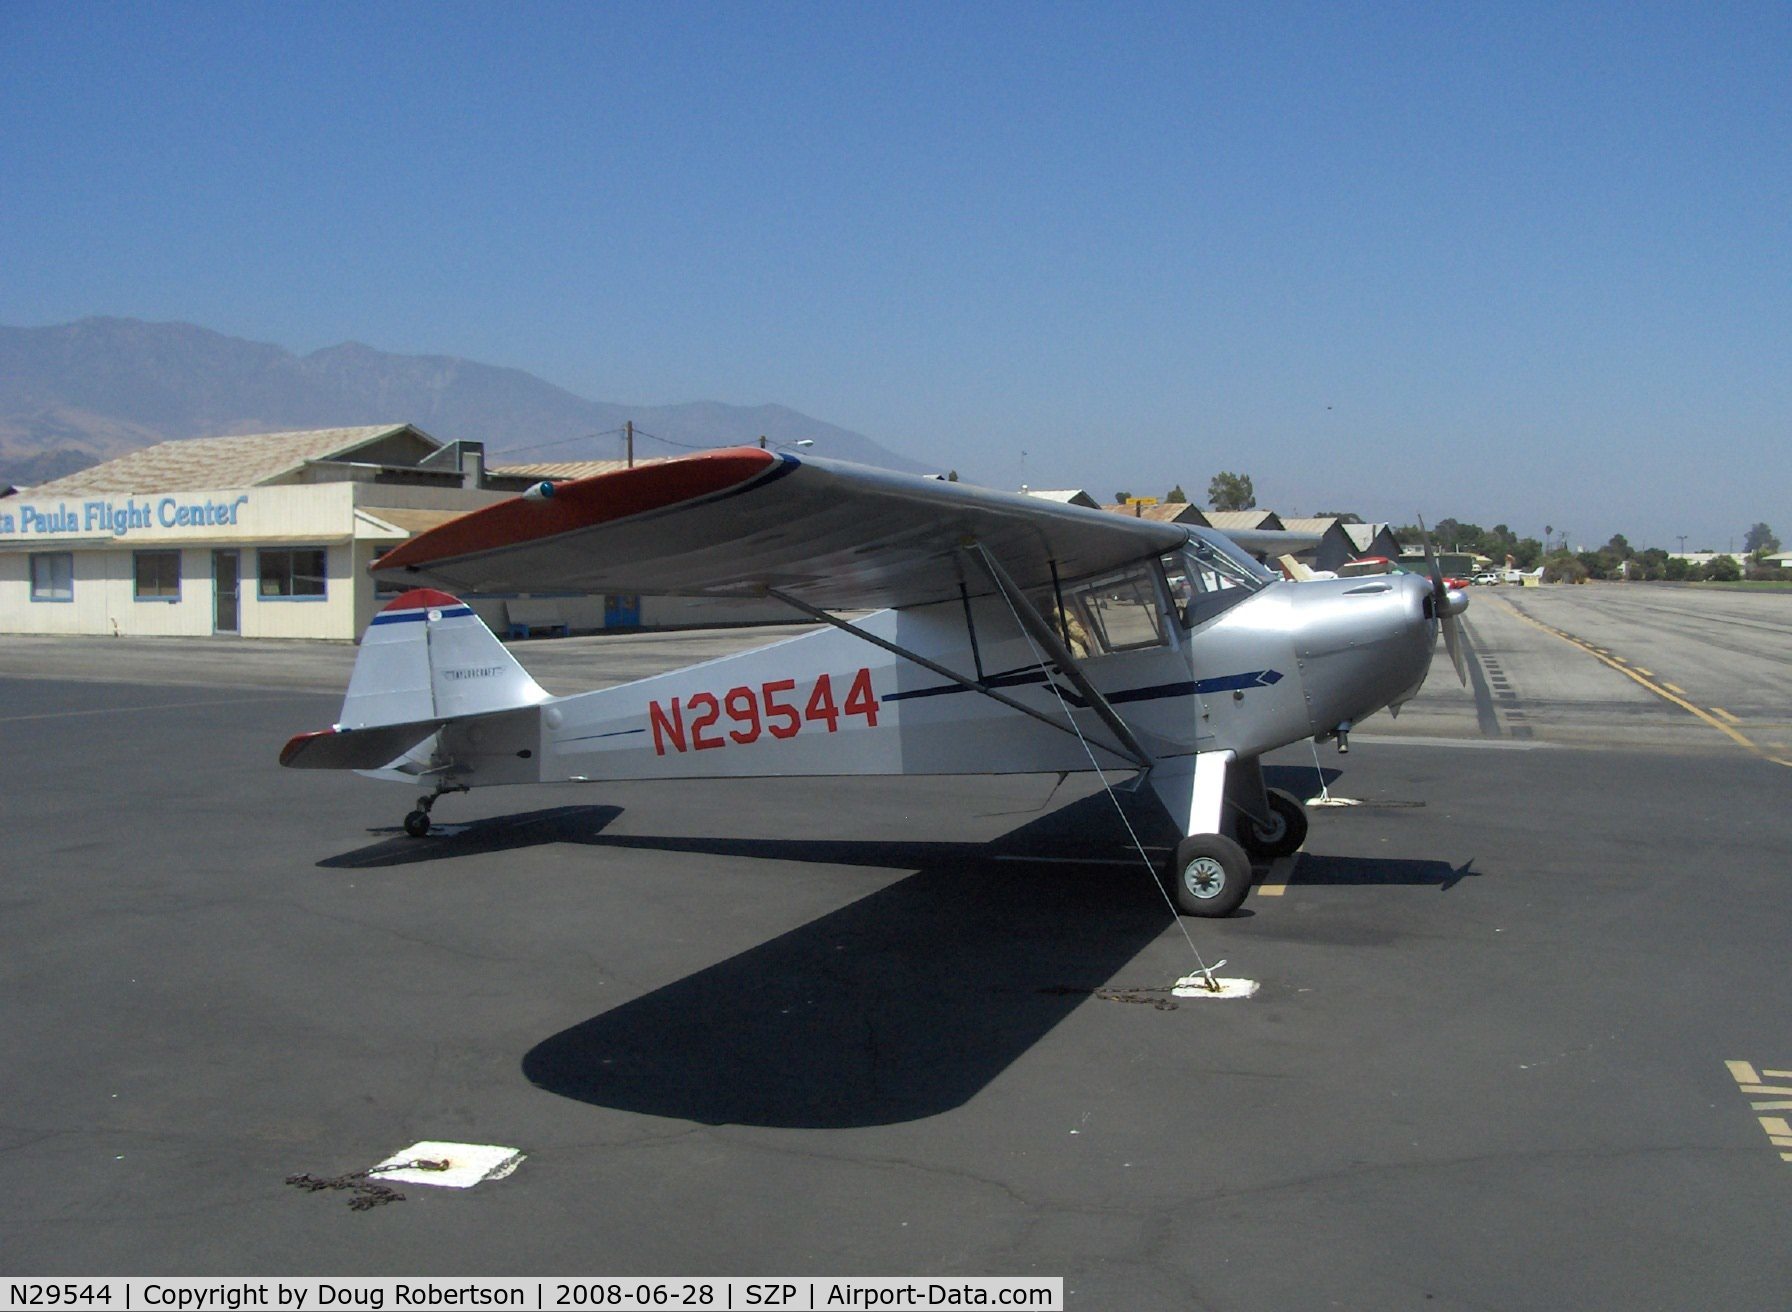 N29544, 1940 Taylorcraft BL-65 (L-2F) C/N 2387, 1940 Taylorcraft BL-65, Continental A&C-65 65 Hp engine change from original Lycoming, clear lexan approved airfoil mod over cabin top